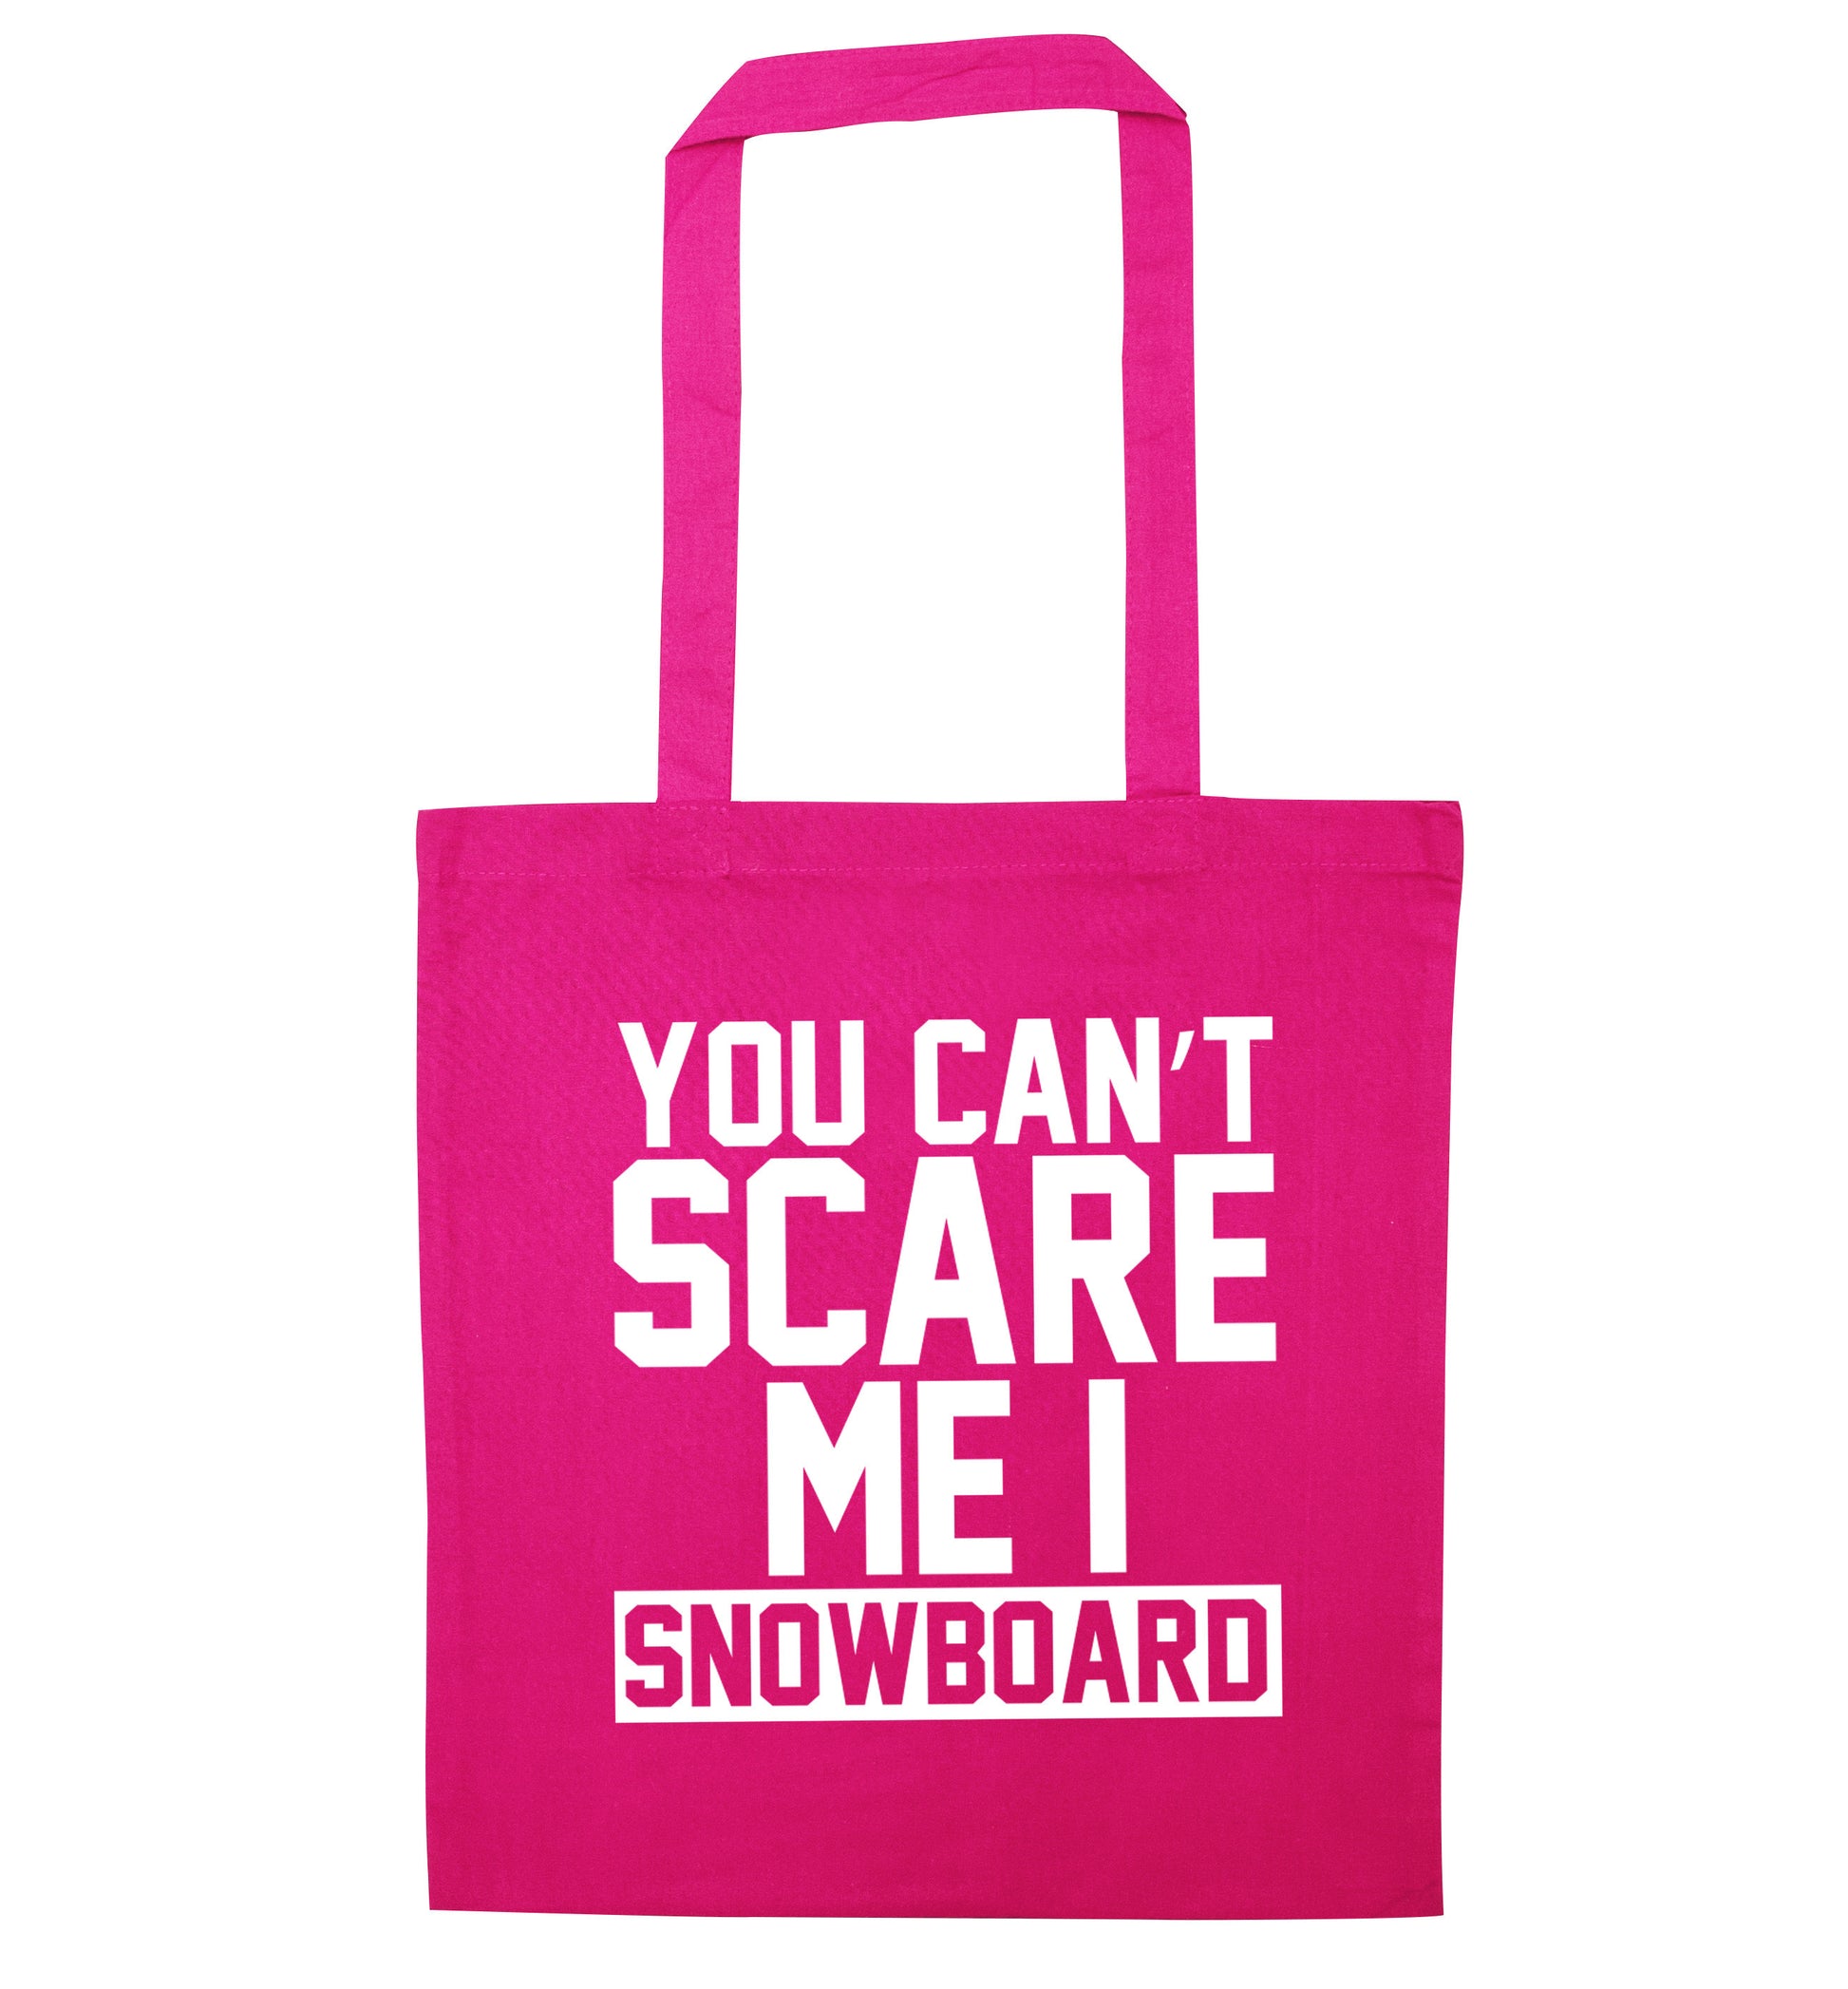 You can't scare me I snowboard pink tote bag